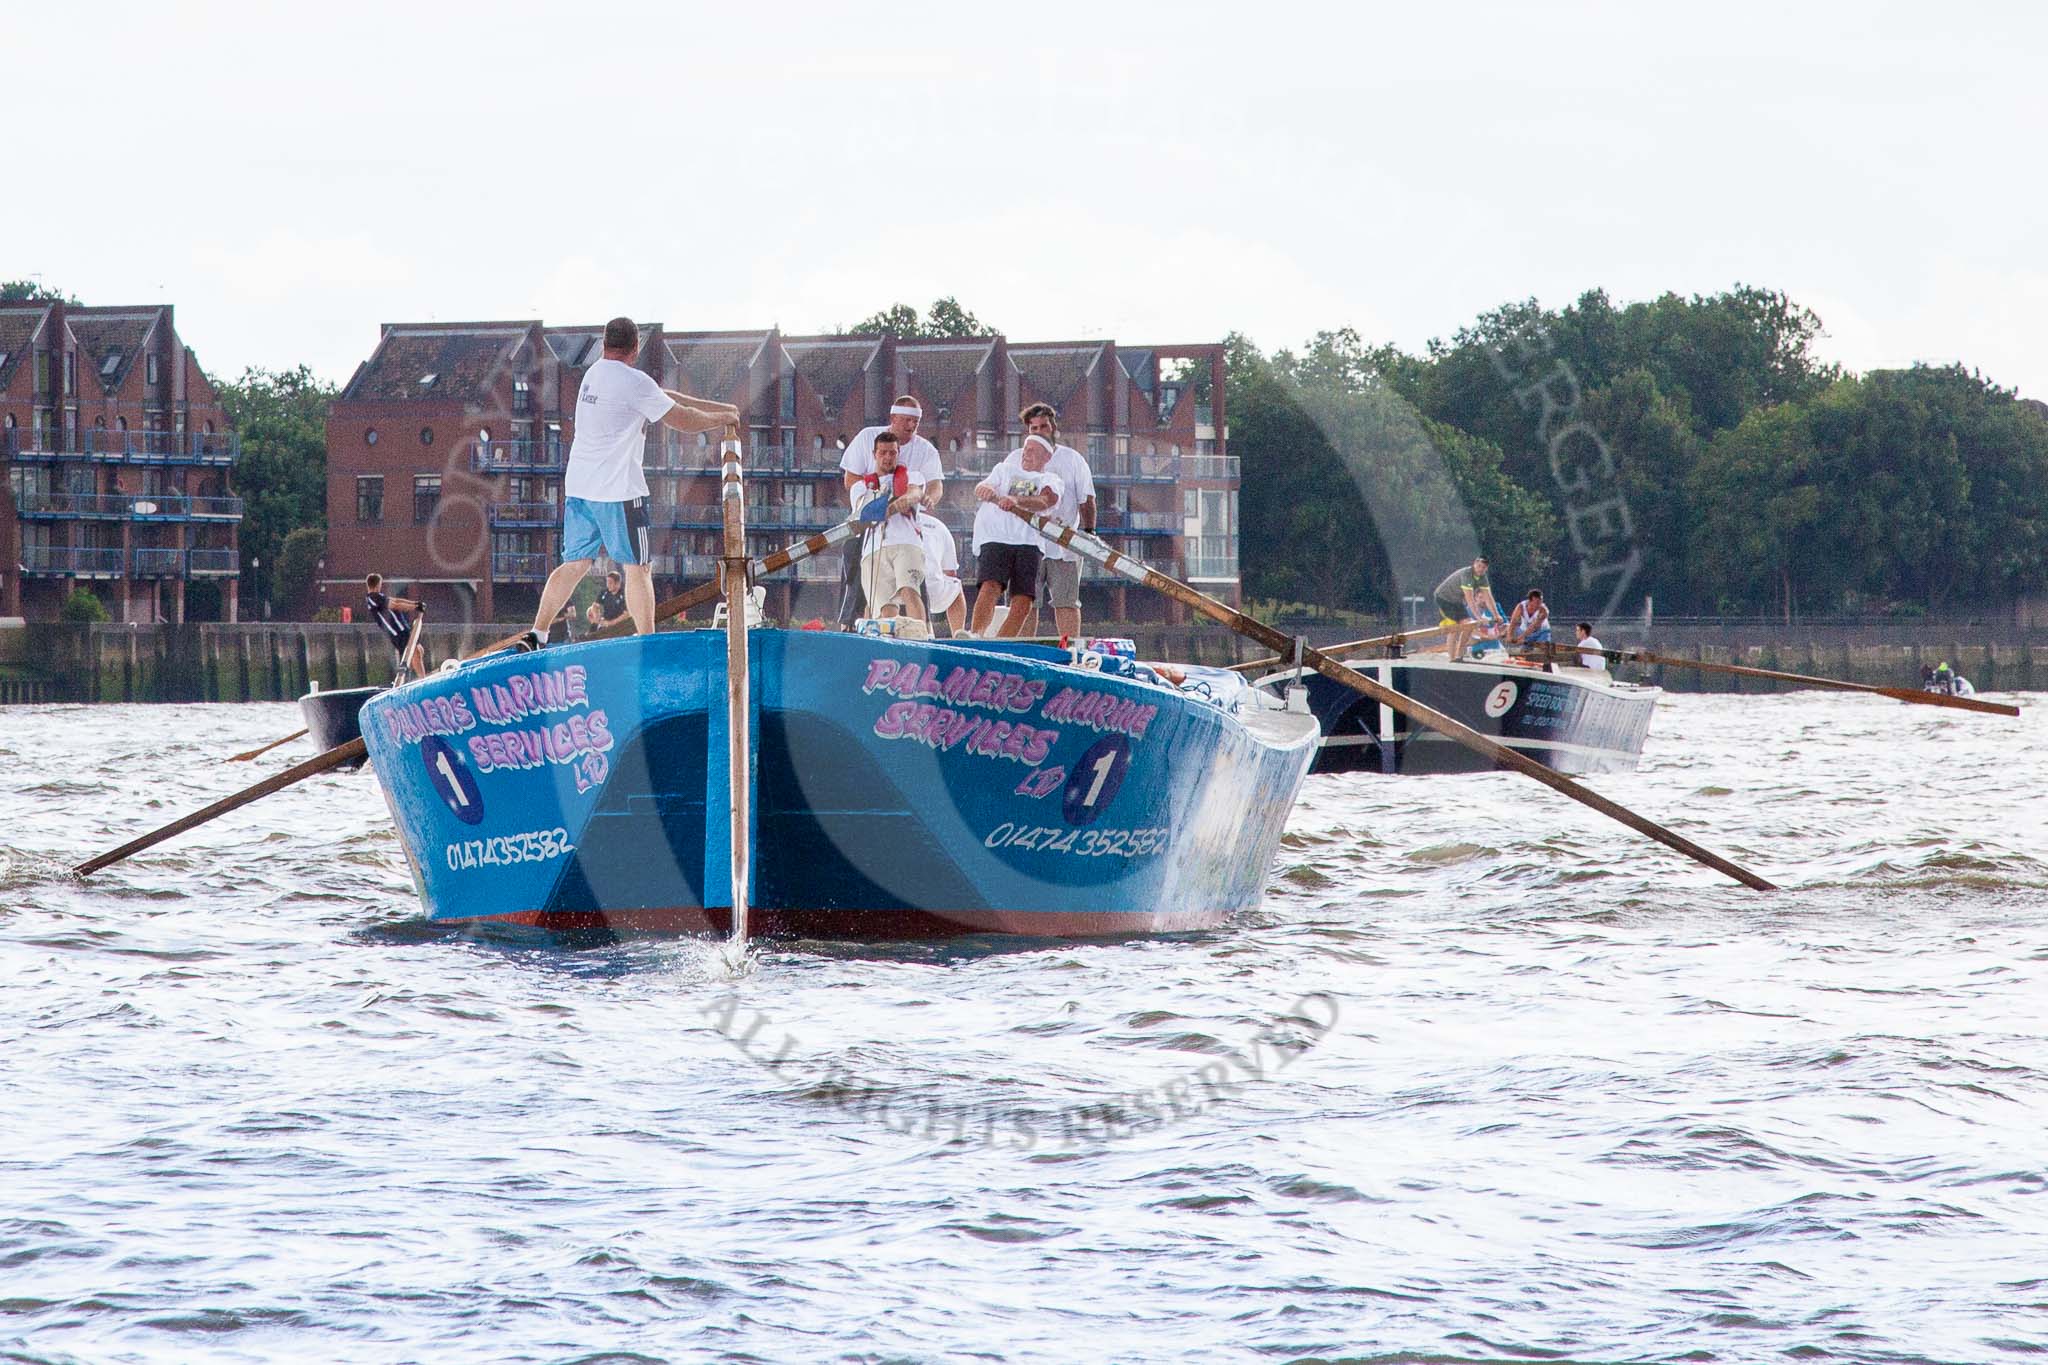 TOW River Thames Barge Driving Race 2014.
River Thames between Greenwich and Westminster,
London,

United Kingdom,
on 28 June 2014 at 13:12, image #204